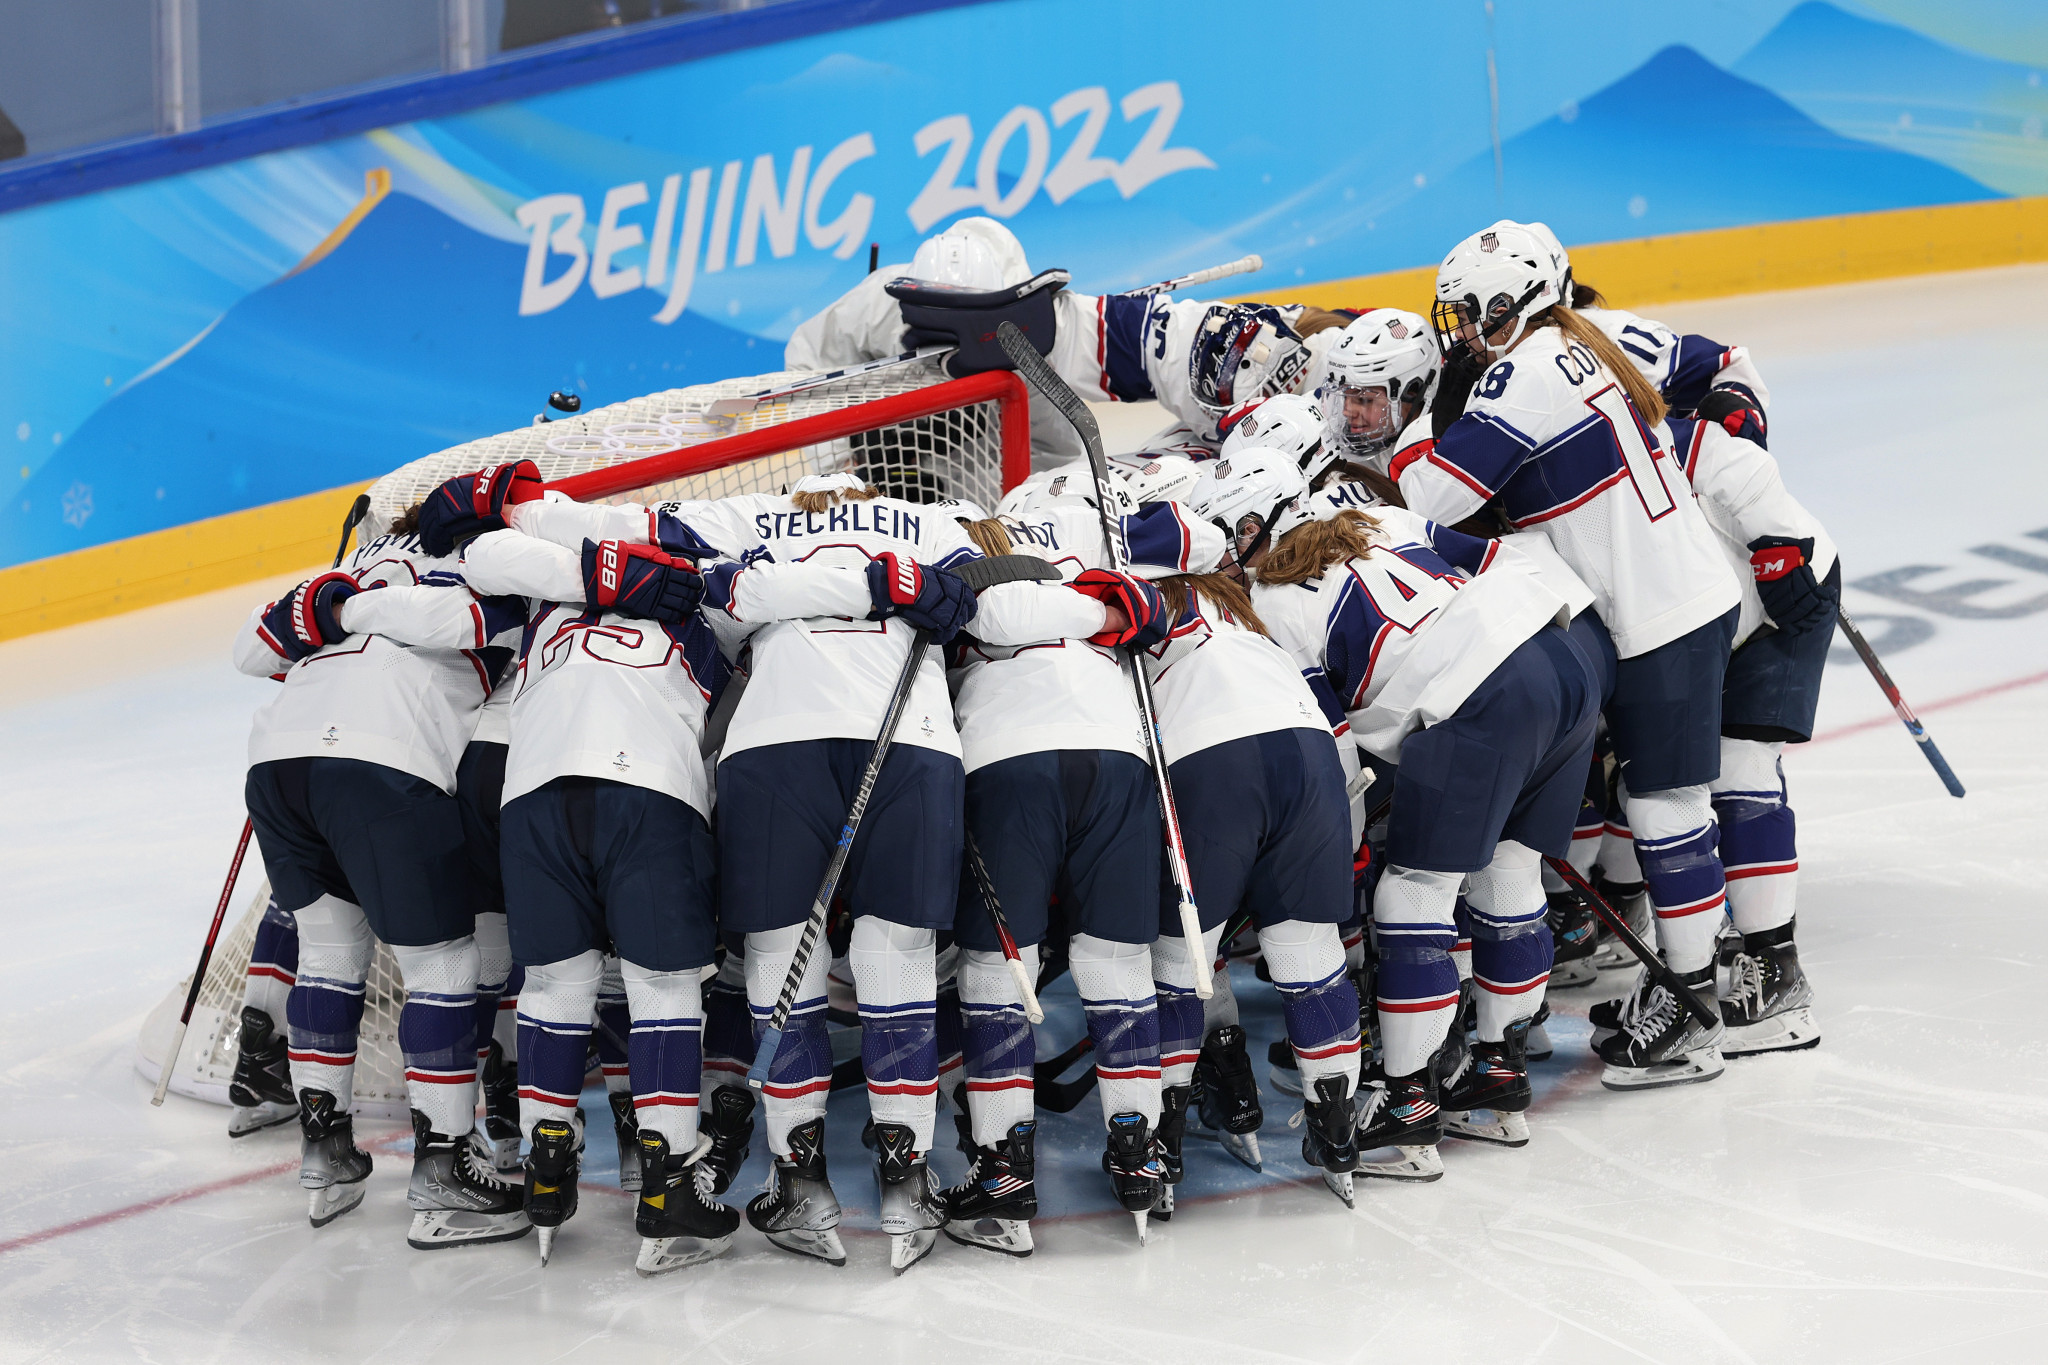 United States hit 12 goals in quarter-final at Women’s World Ice Hockey Championship